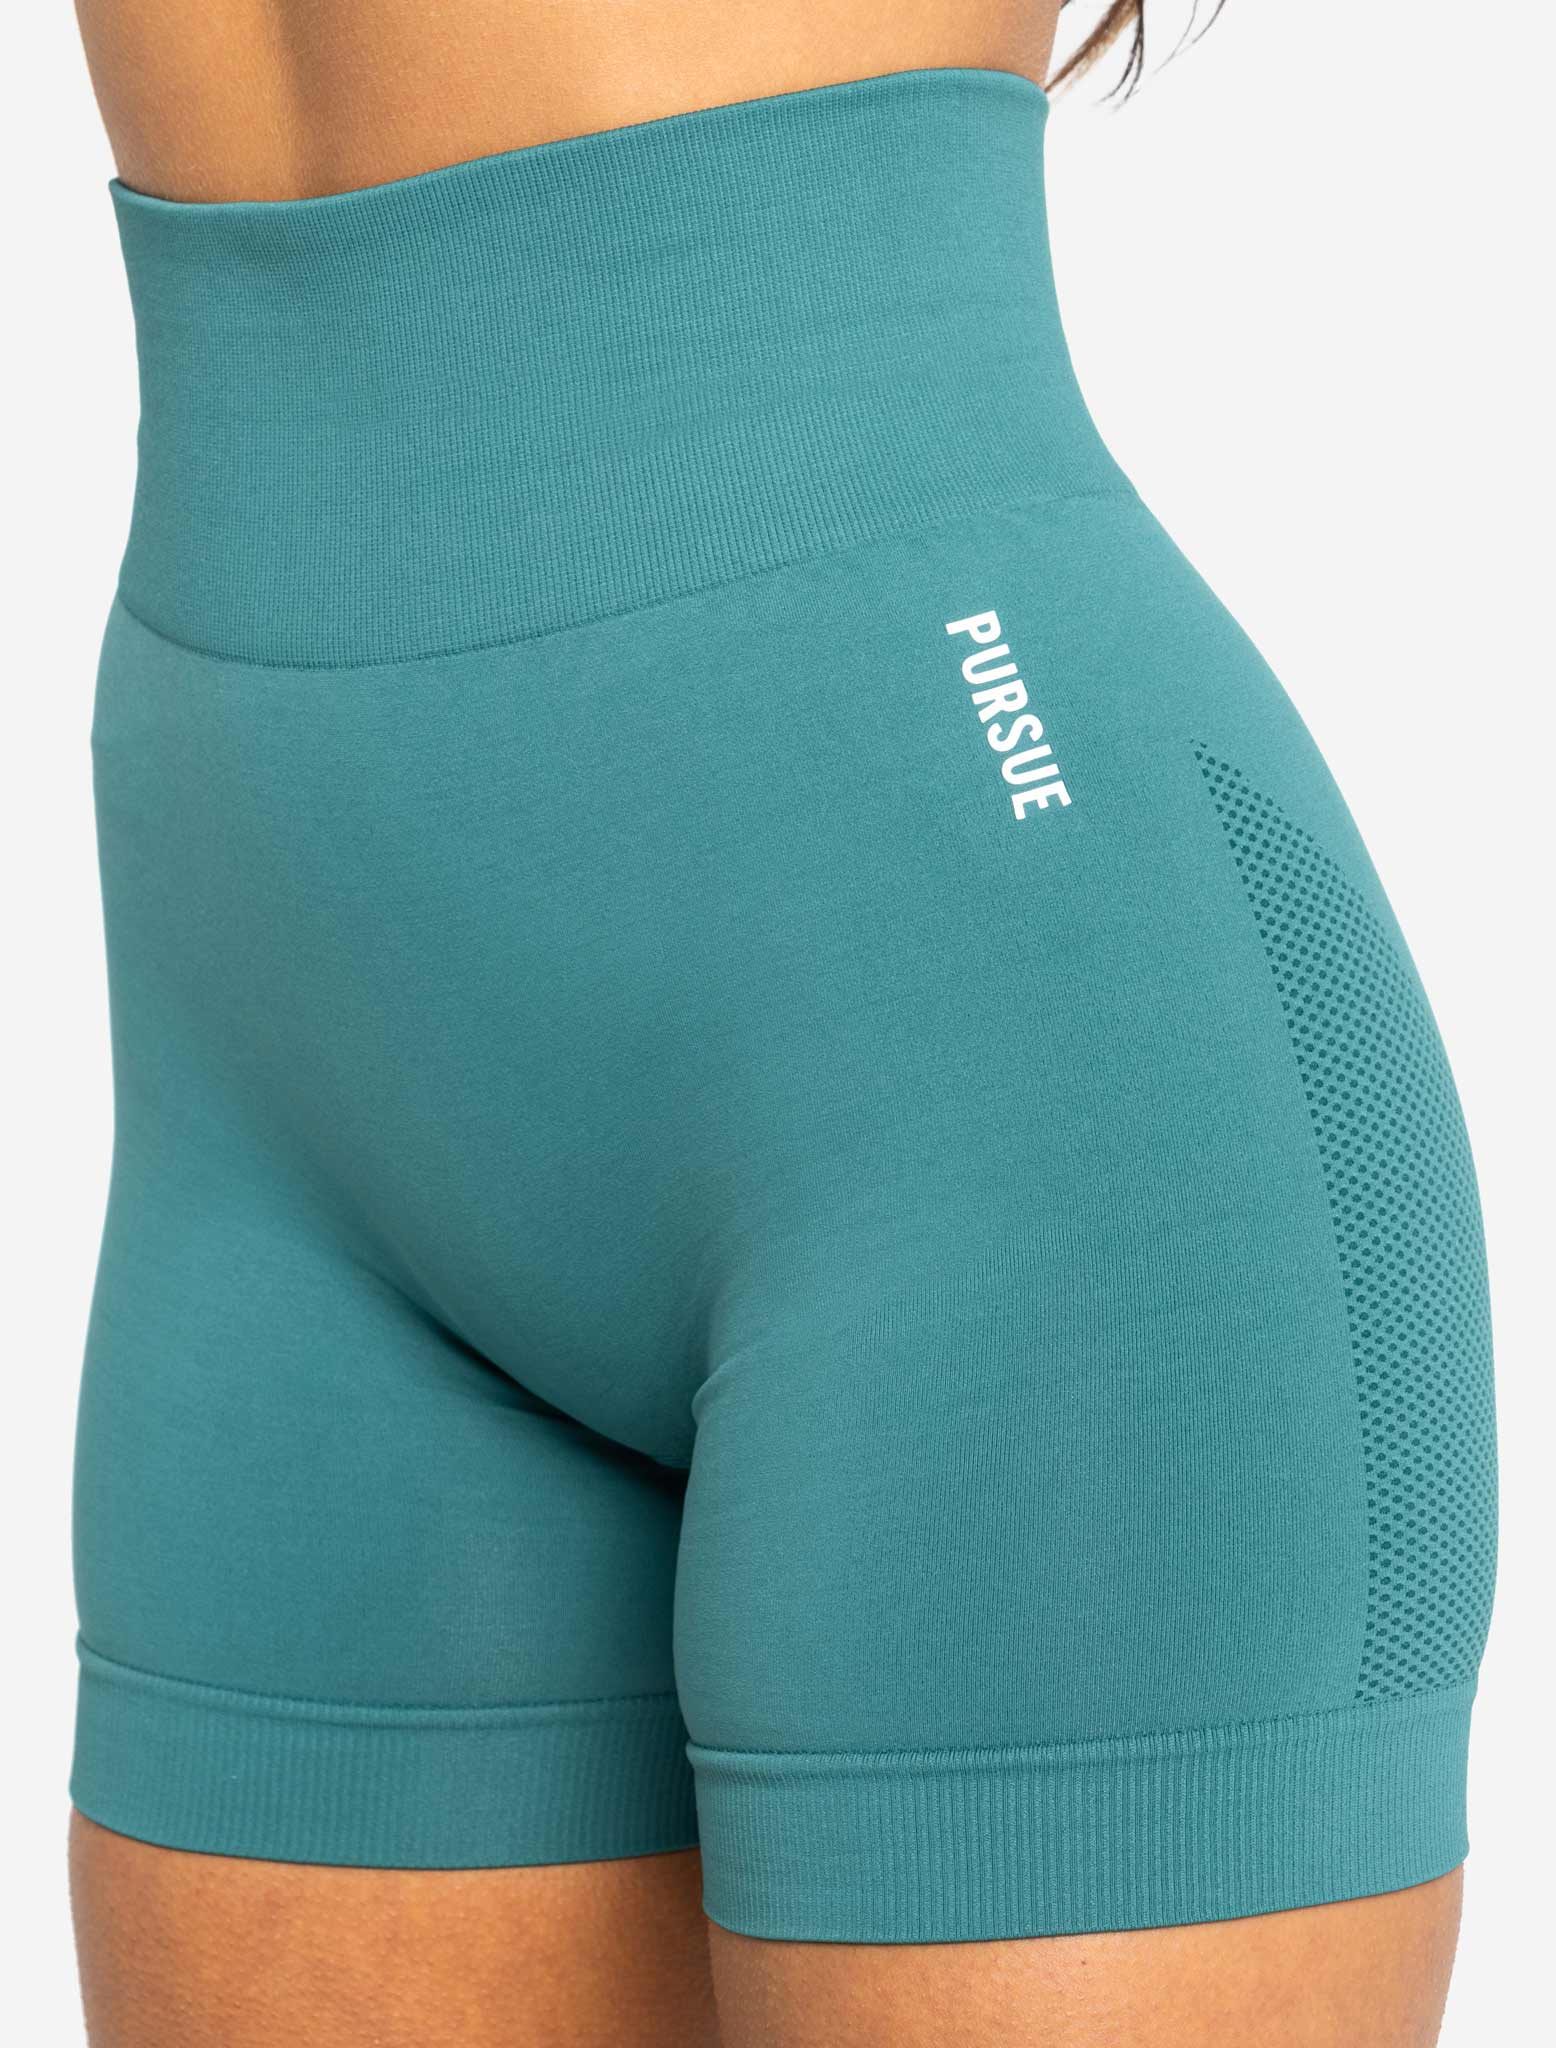 Move Seamless Shorts / Teal Pursue Fitness 6